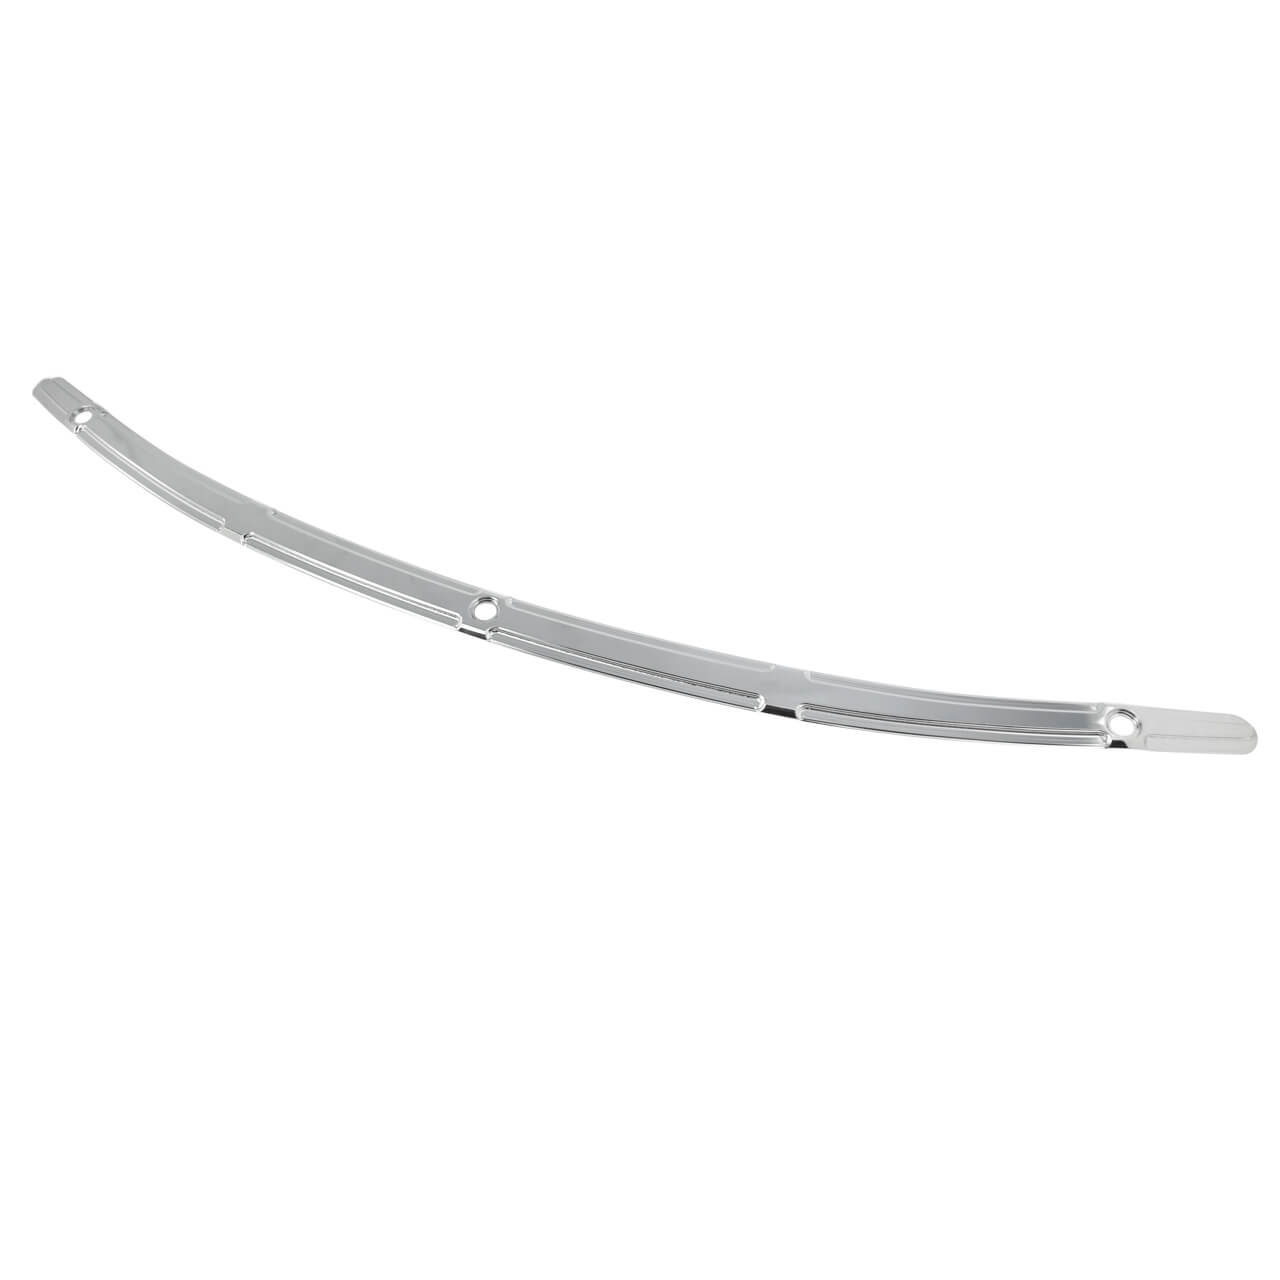 WI0003-mactions-windshield-trim-for-harley-electra-glide